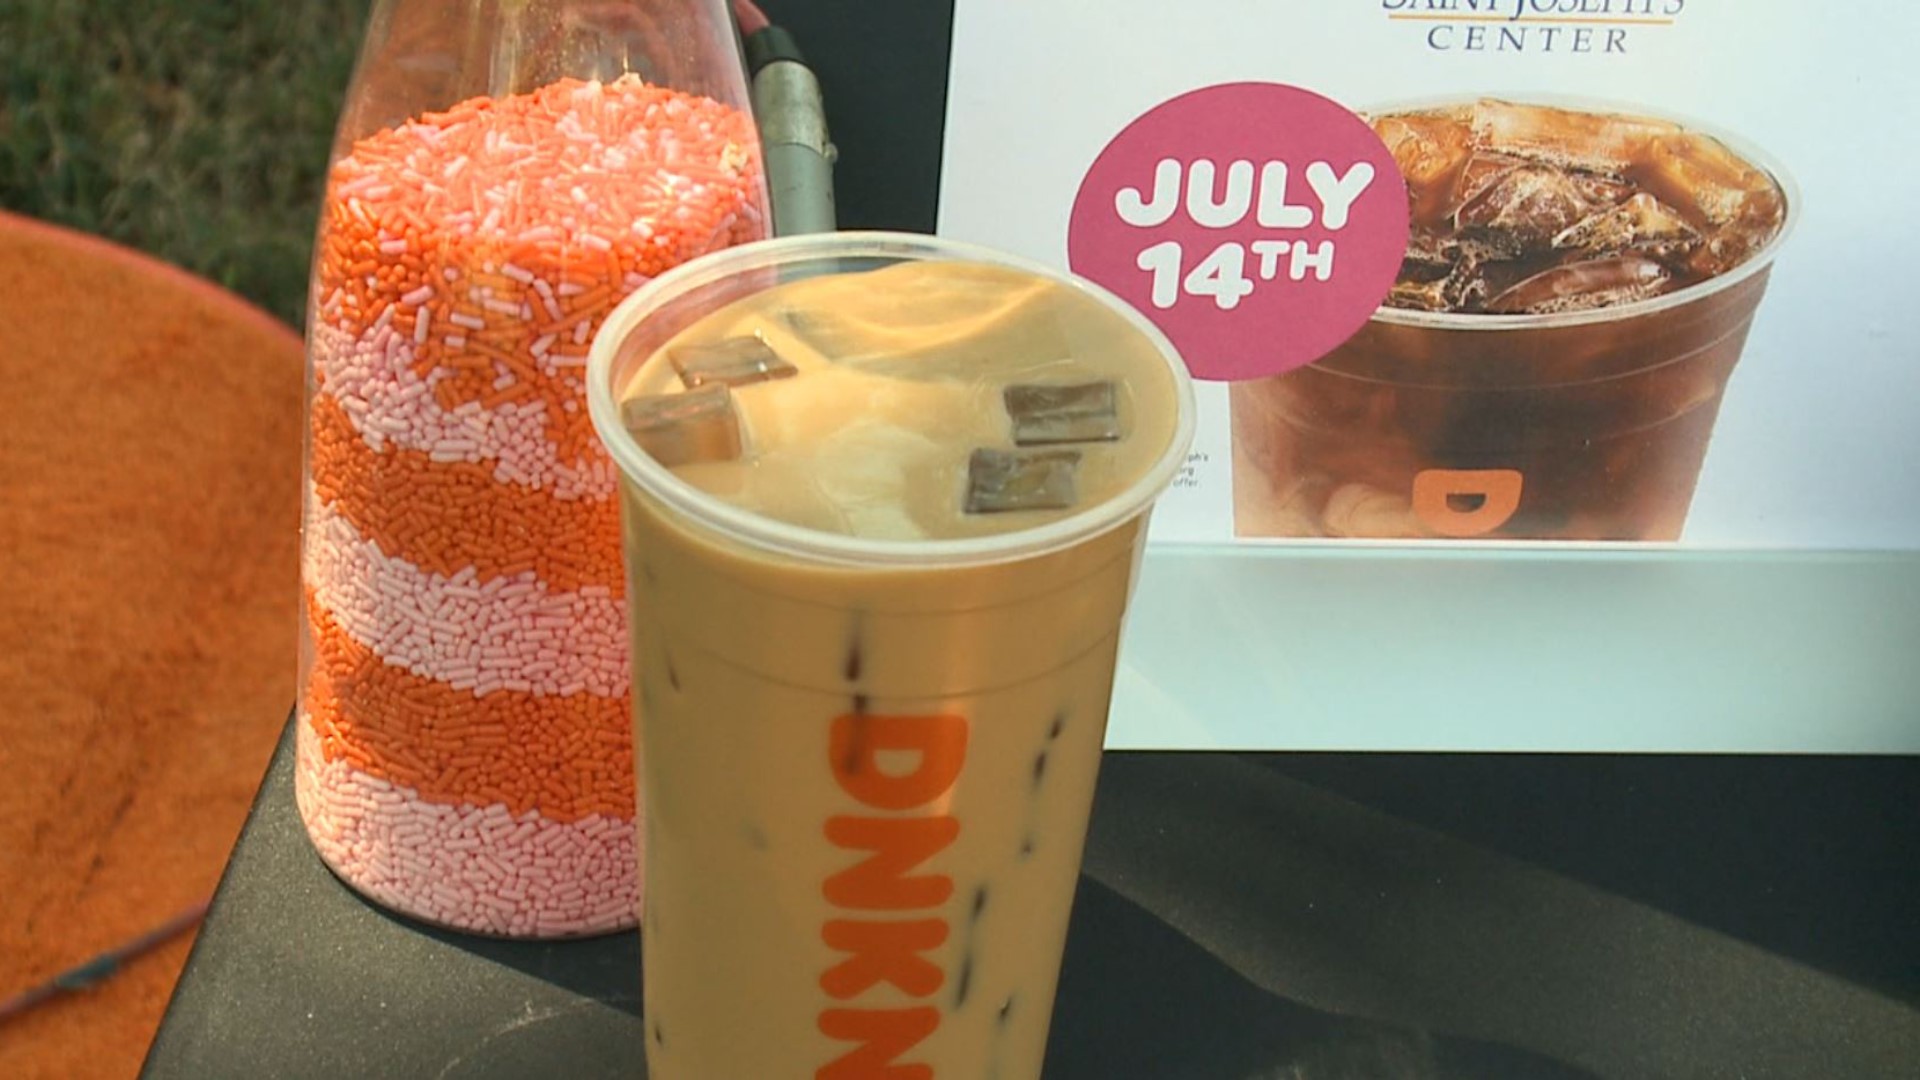 Iced Coffee Day at Dunkin’ to Support Go Joe 24